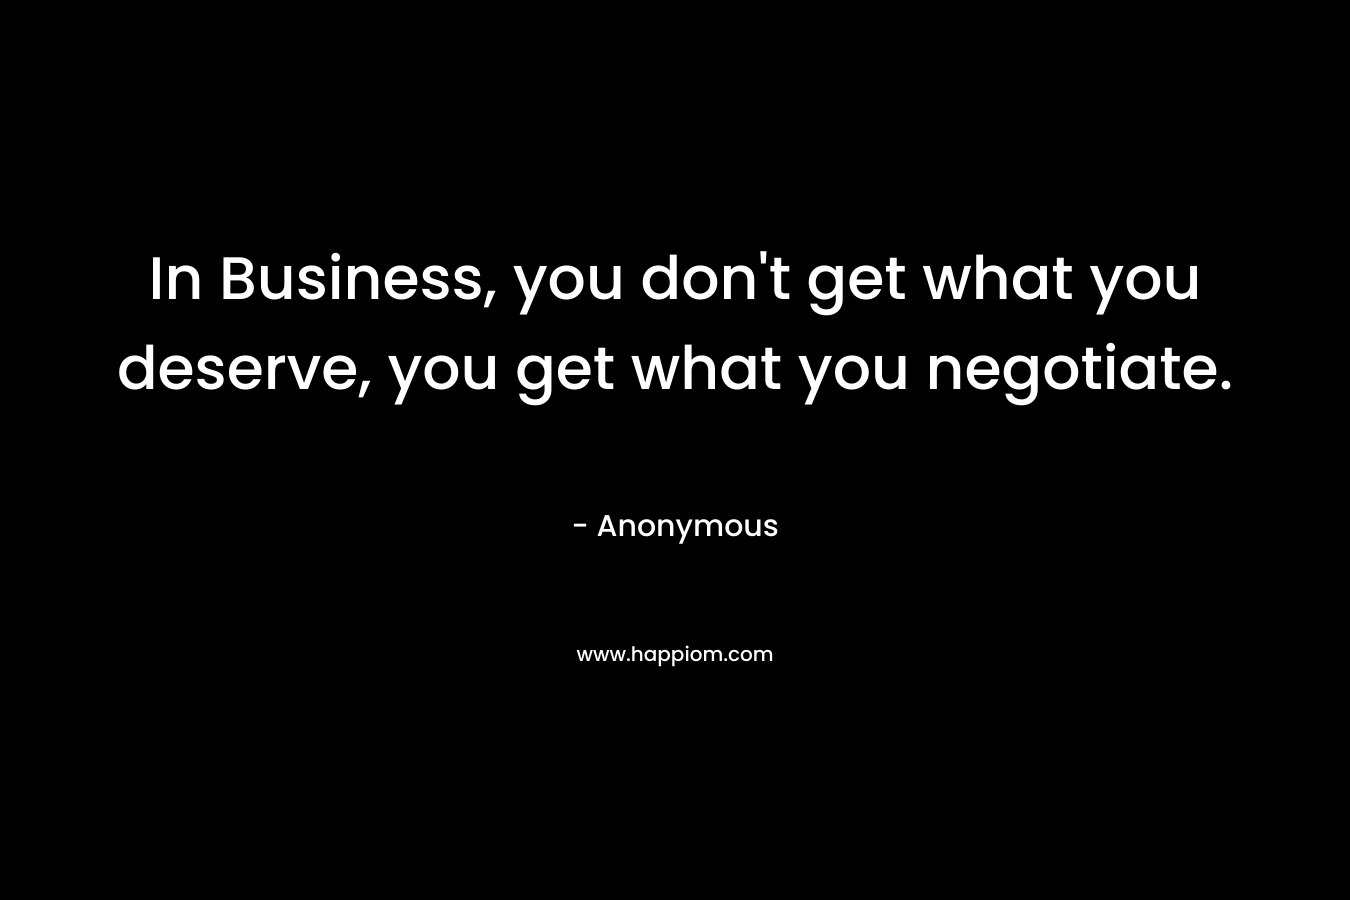 In Business, you don’t get what you deserve, you get what you negotiate. – Anonymous